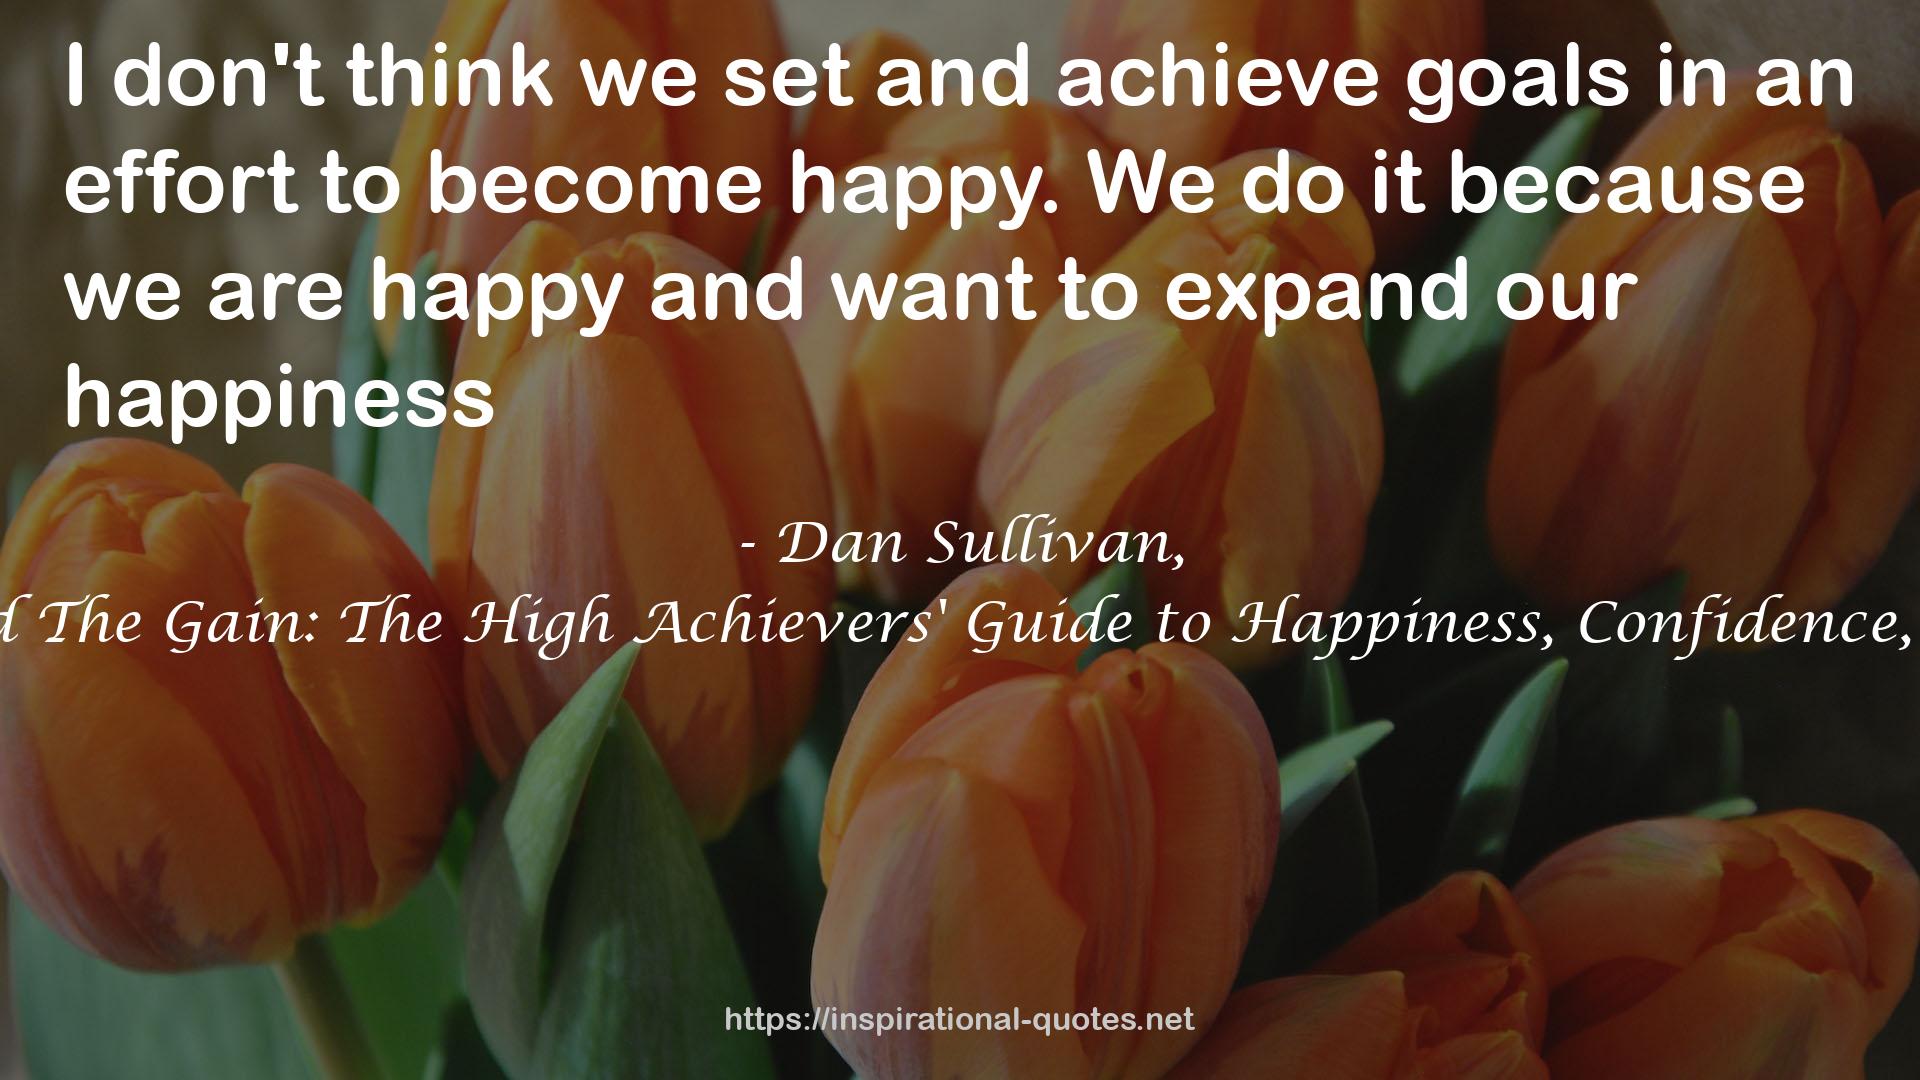 The Gap and The Gain: The High Achievers' Guide to Happiness, Confidence, and Success QUOTES